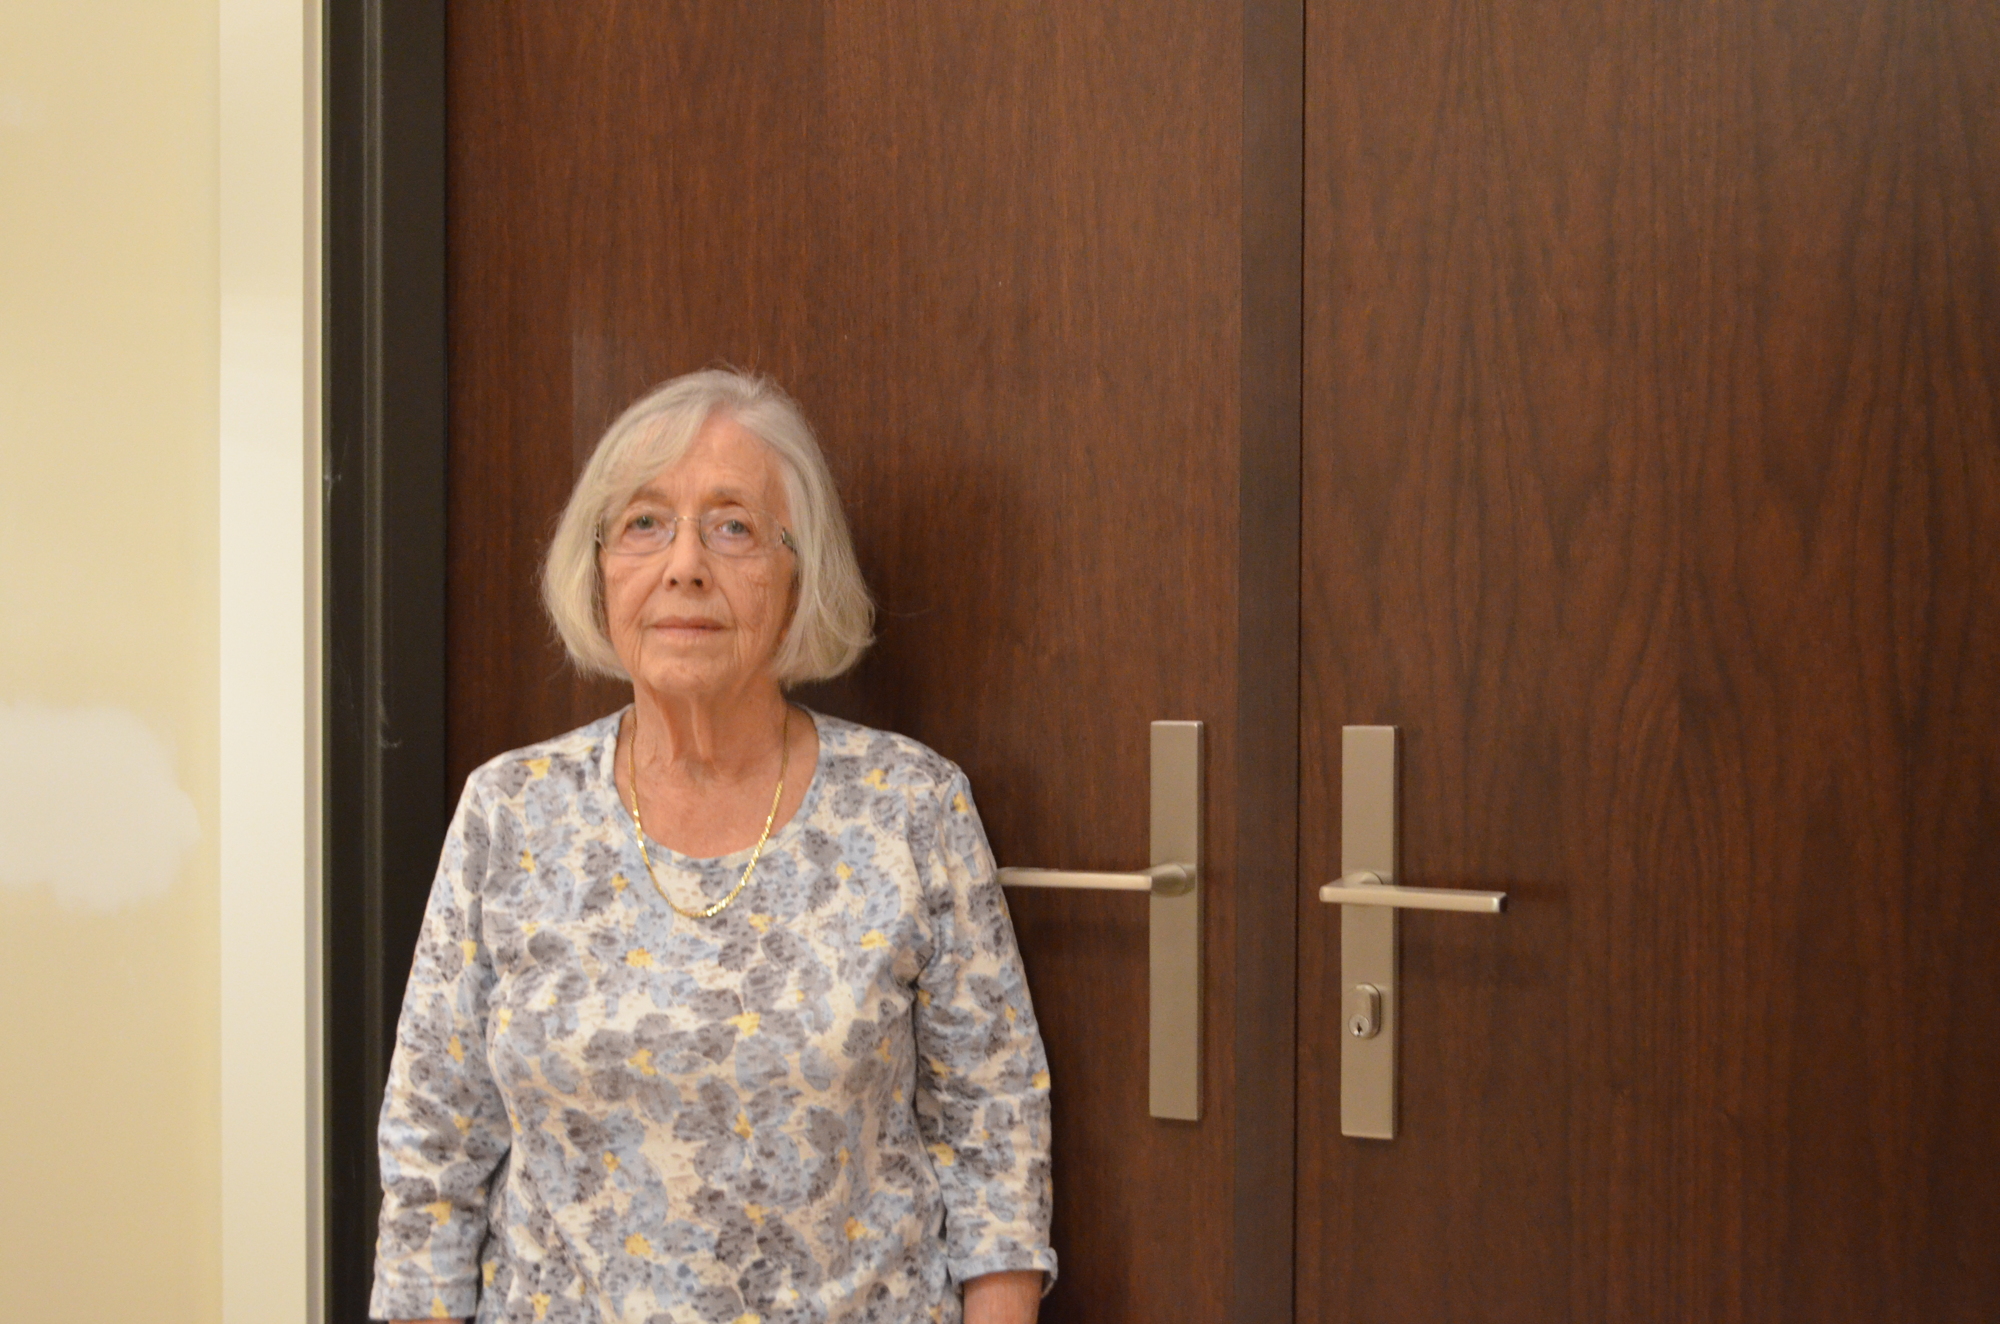 Shirley Deutsch's new door handle is nearly 45 inches high,  reaching to the top of her shoulder.